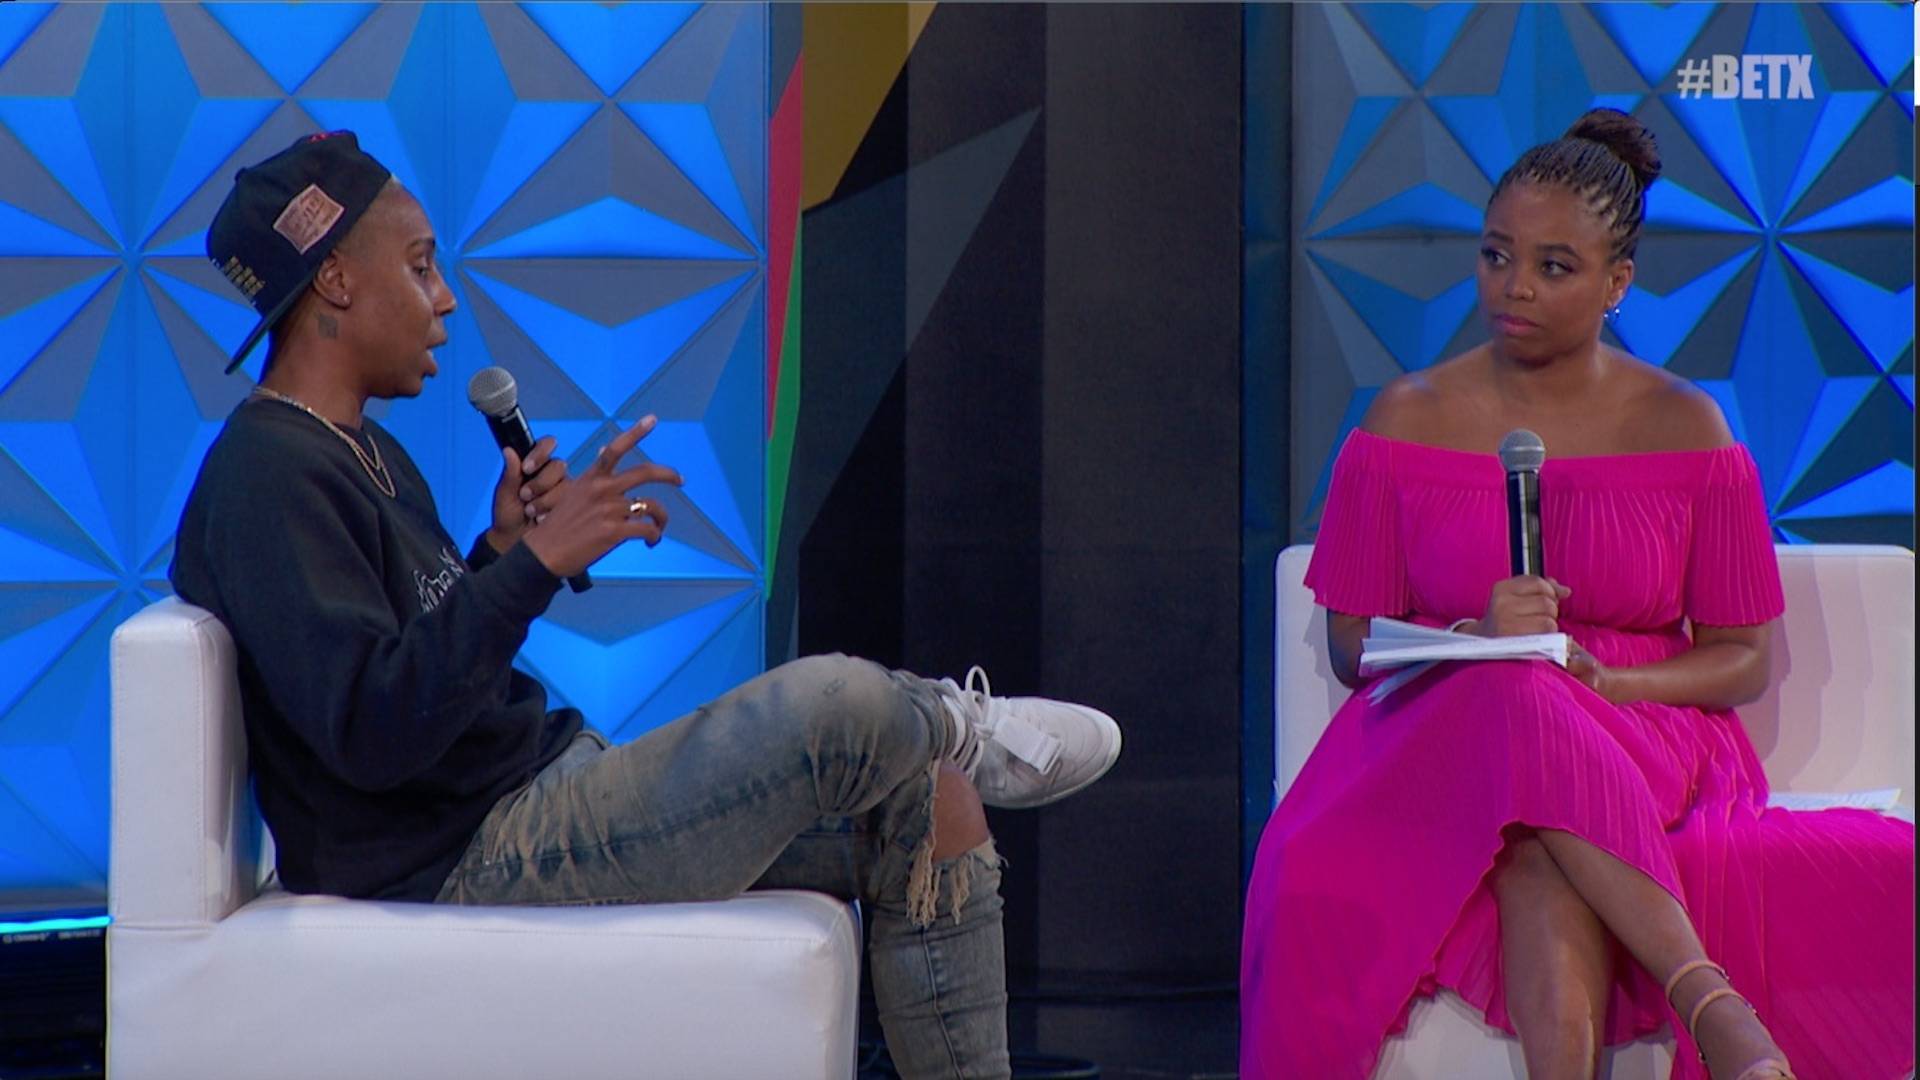 Lena Waithe Chats About Boomerang with Jamele Hill during Genius Talks, at the BET Experience 2019.